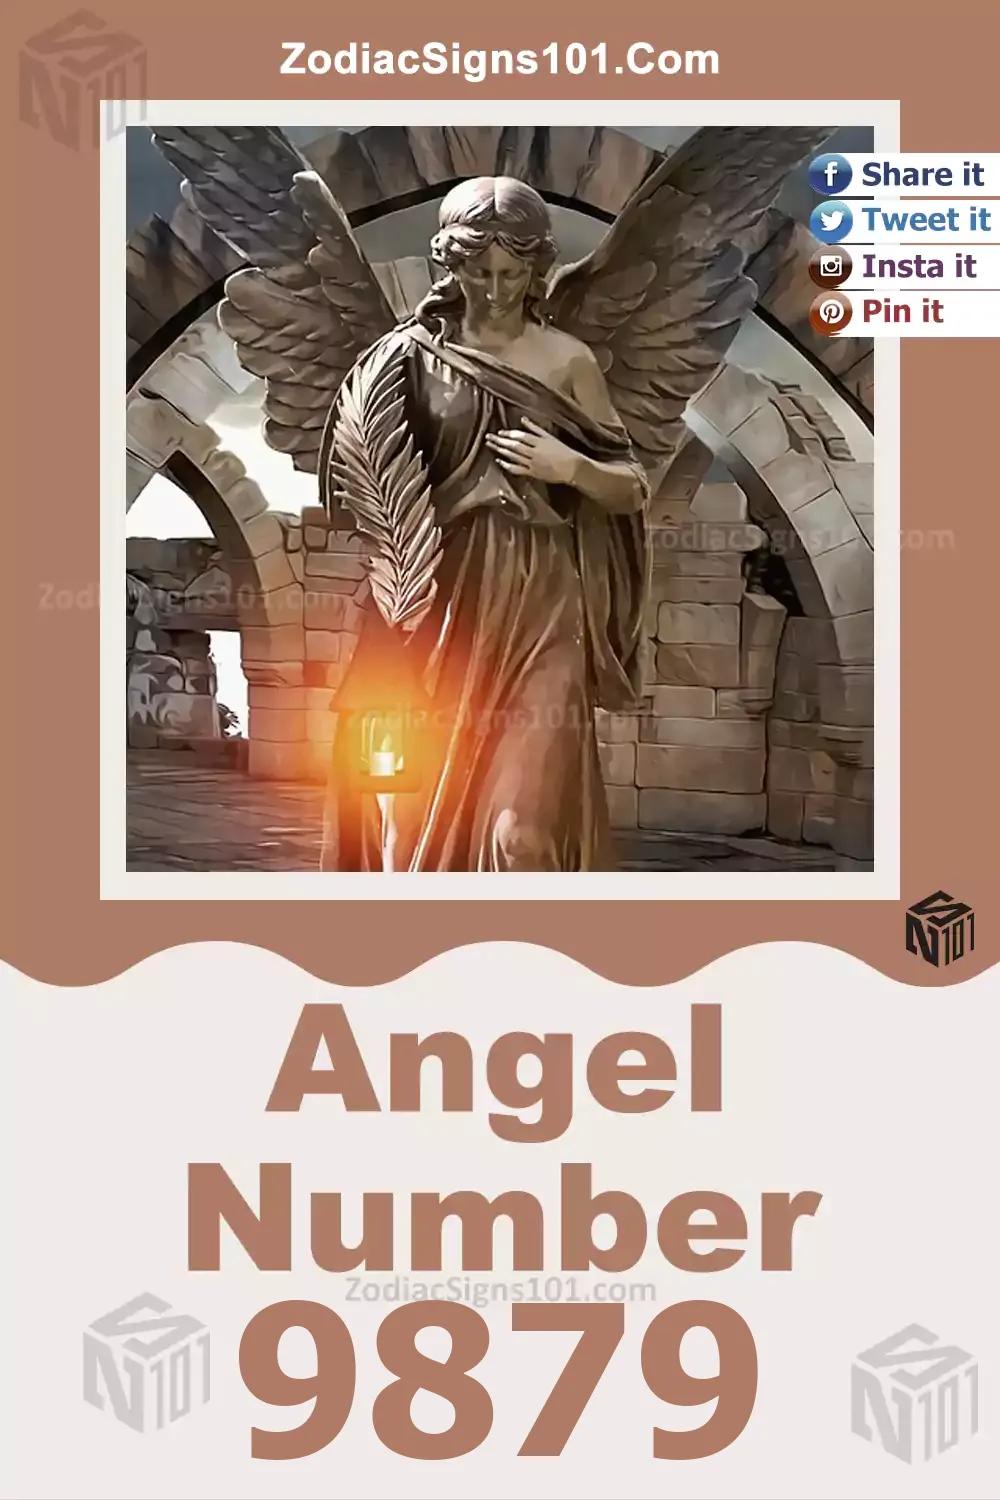 9879 Angel Number Meaning